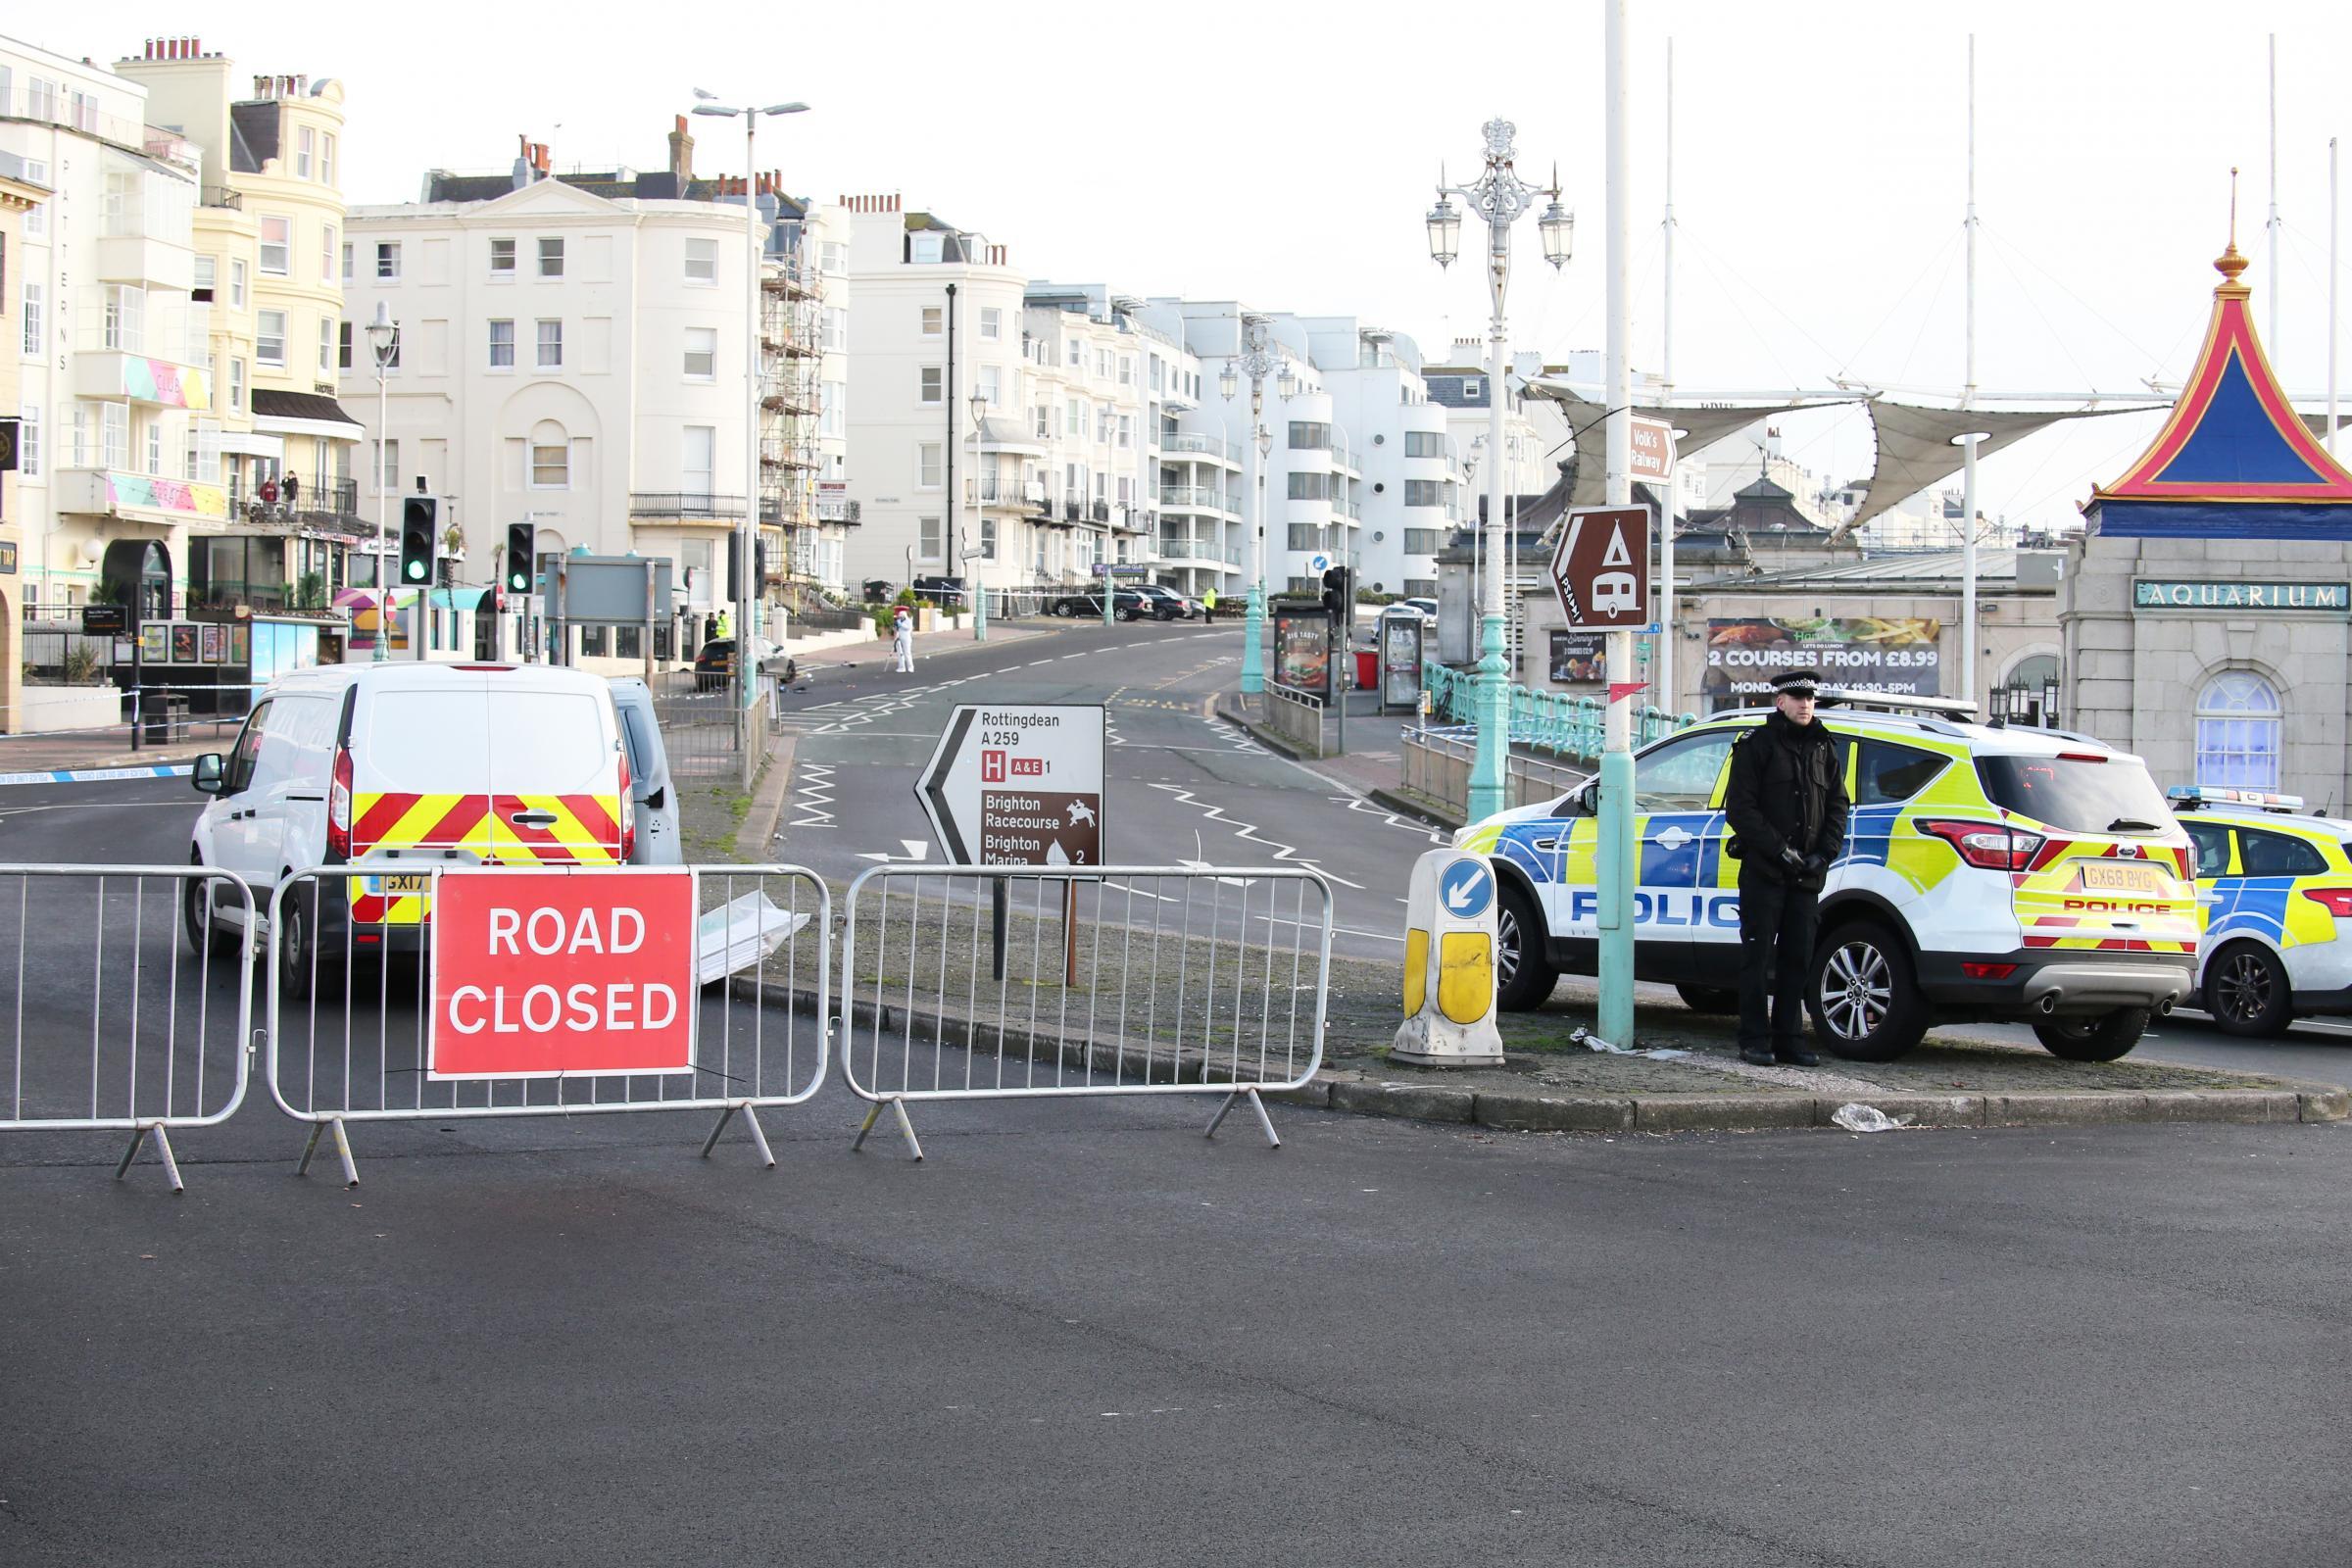 The scene in Brighton after the incident in Marine Parade where Suel Delgado was killed in a suspected hit and run